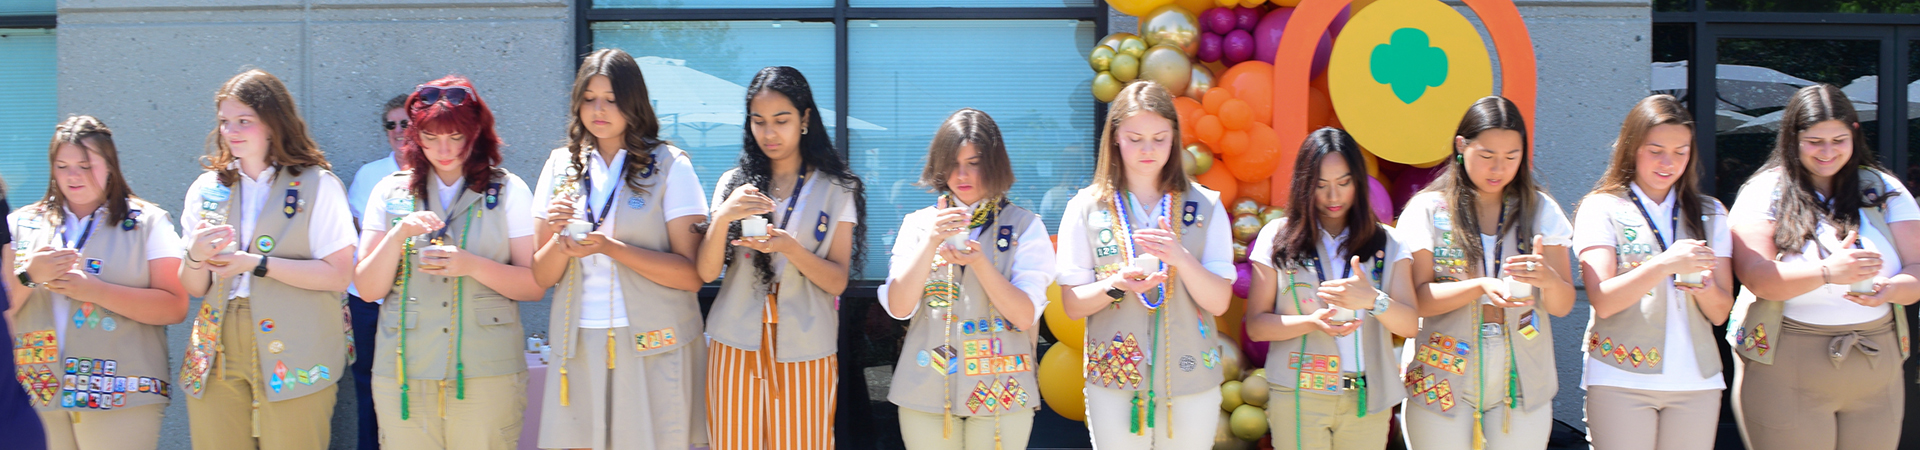  gold award girl scouts standing in a line with candles 